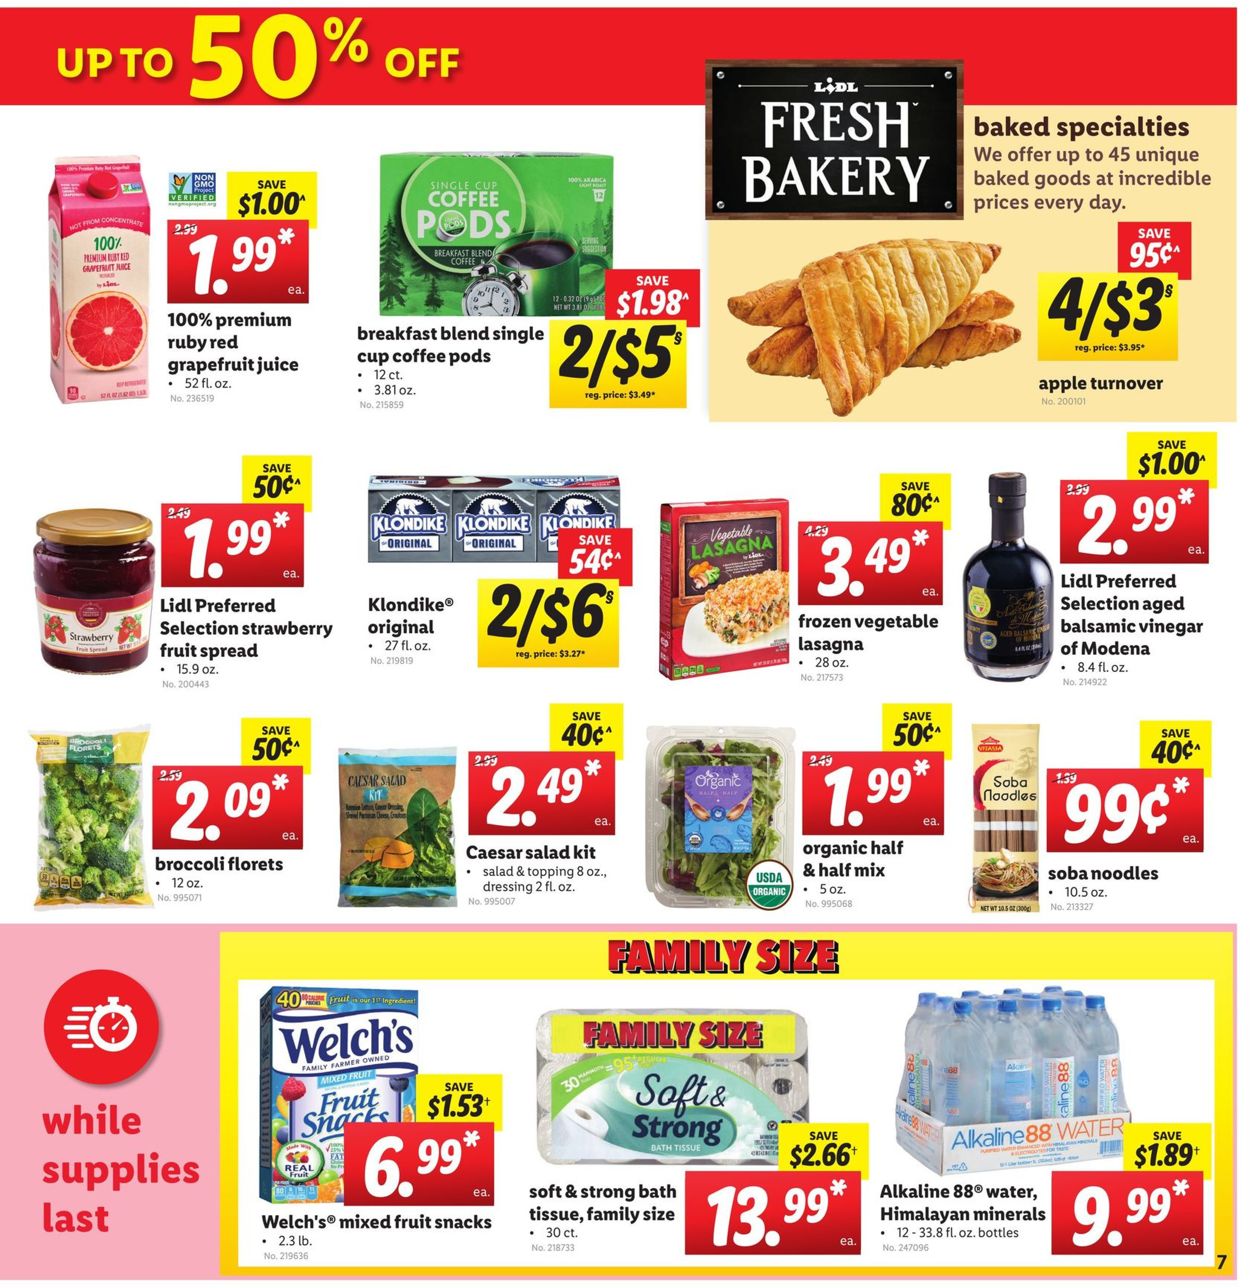 Current weekly ad 11/25 - 12/01/2020 [7] - frequent-ads.com